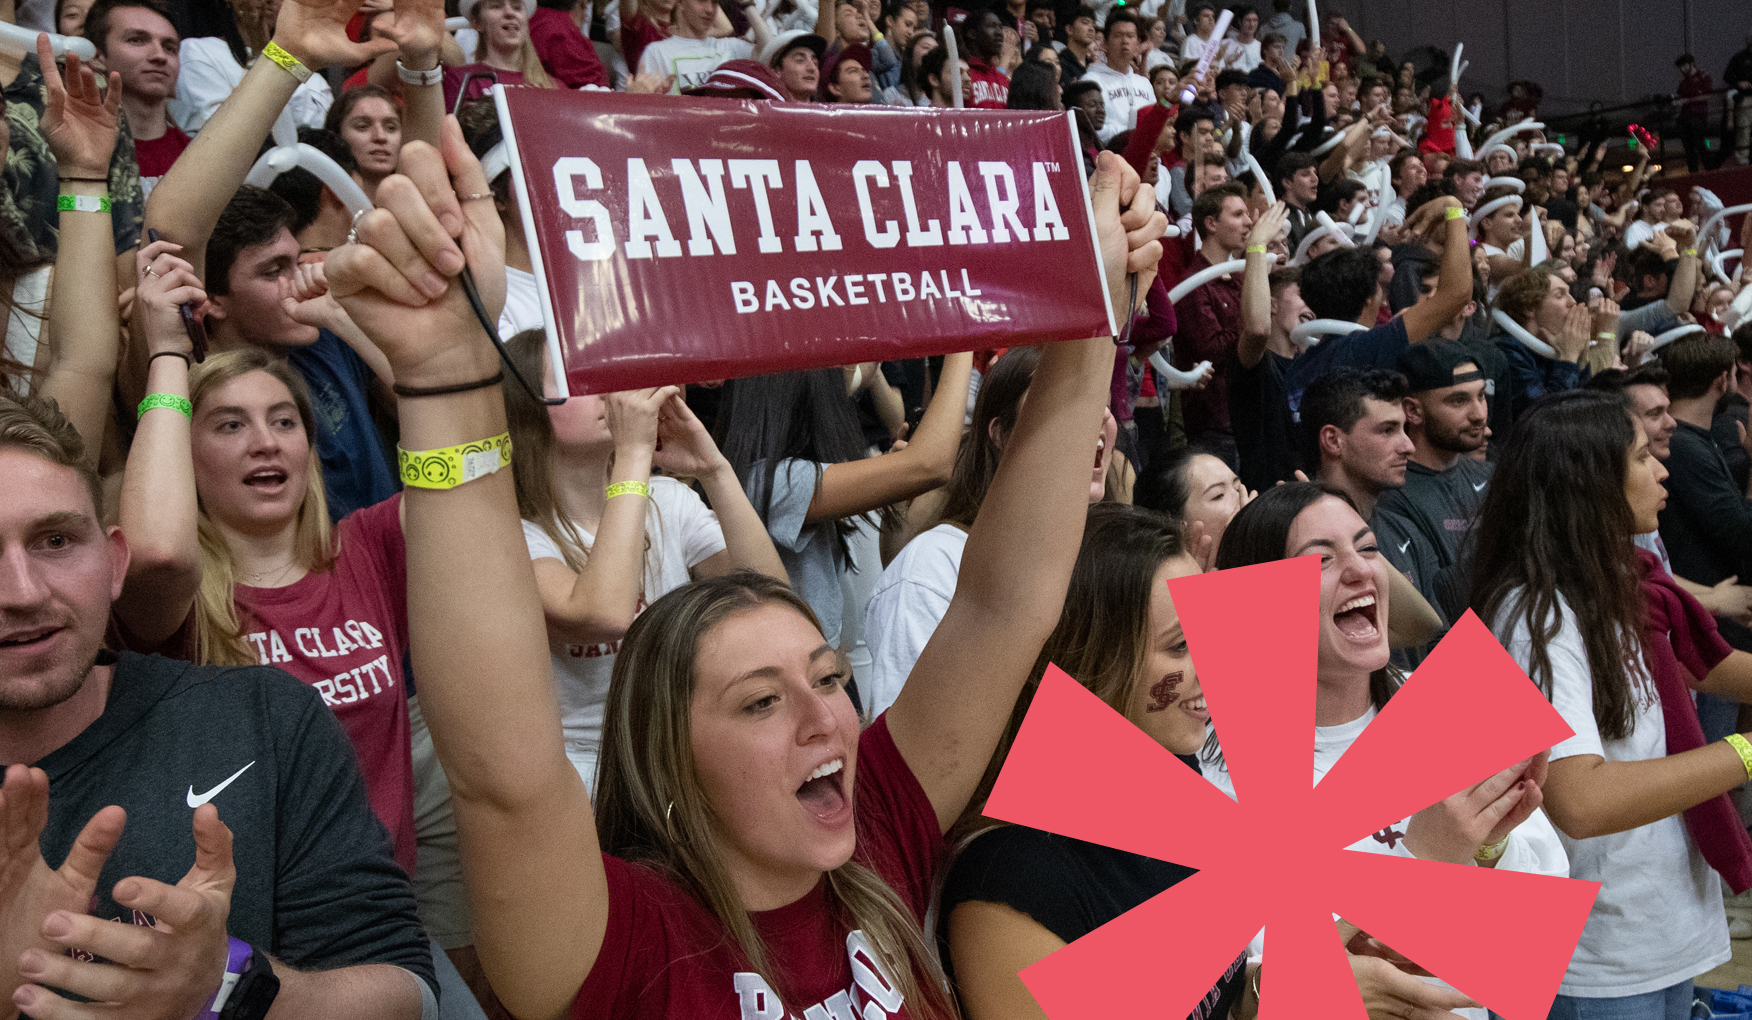 A crowd of enthusiastic Santa Clara University students cheering at a basketball game. One student is holding up a sign that reads 'SANTA CLARA BASKETBALL'.